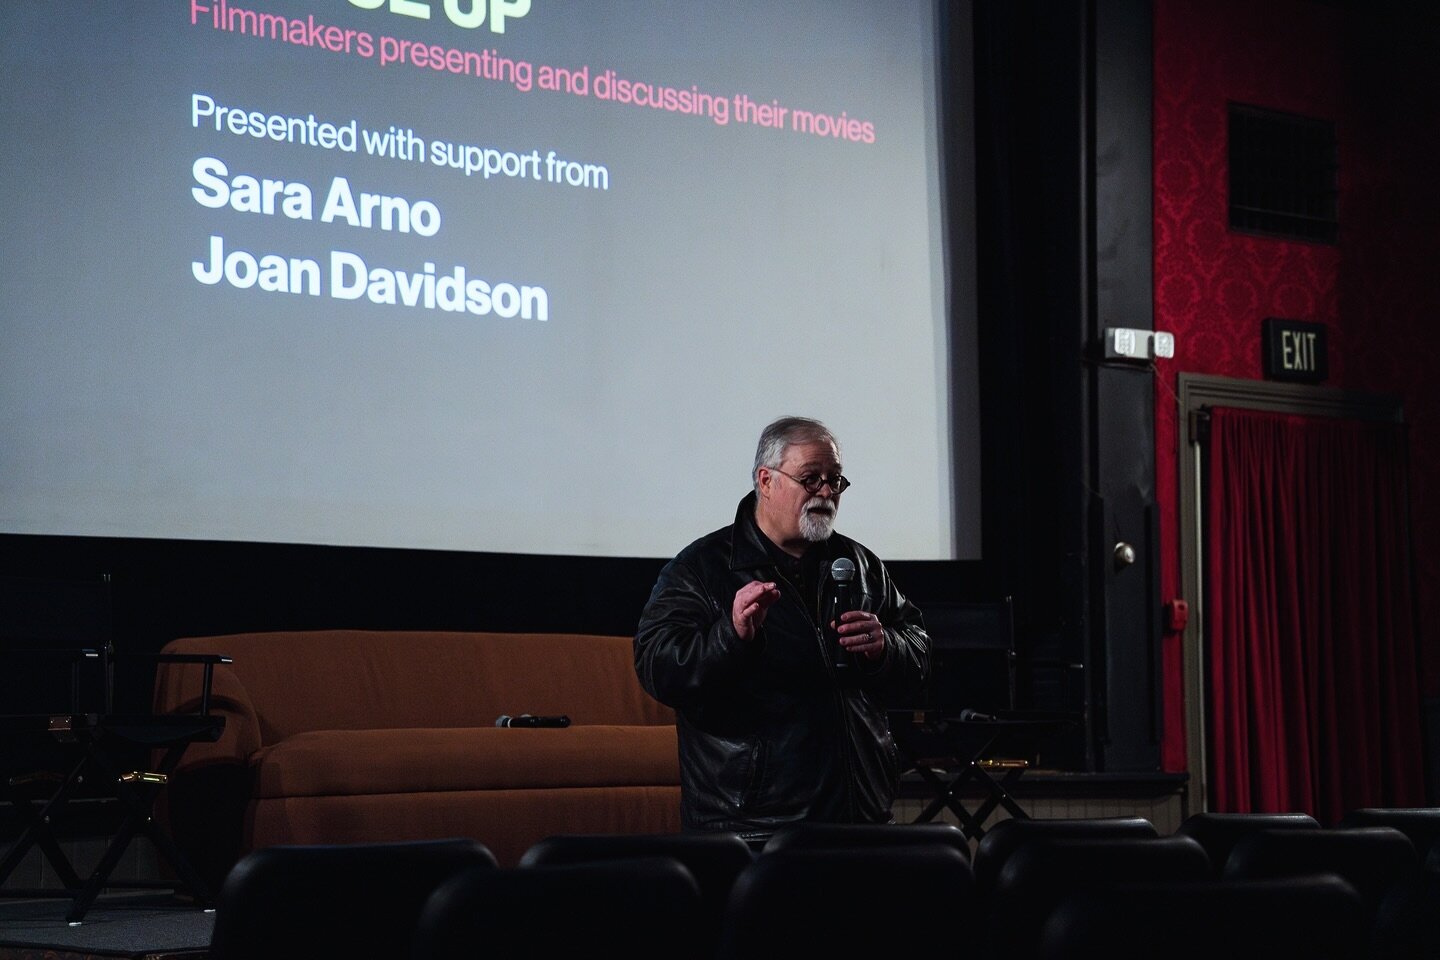 Daron Hagen, (composer/librettist/director/editor) gives a brief introduction to the @upstate_films screening &amp; talkback on 25 March. @encompassarts @peermusic_classical @composersnow @_the_scl @operawire @operaamerica #composerdirector #composer